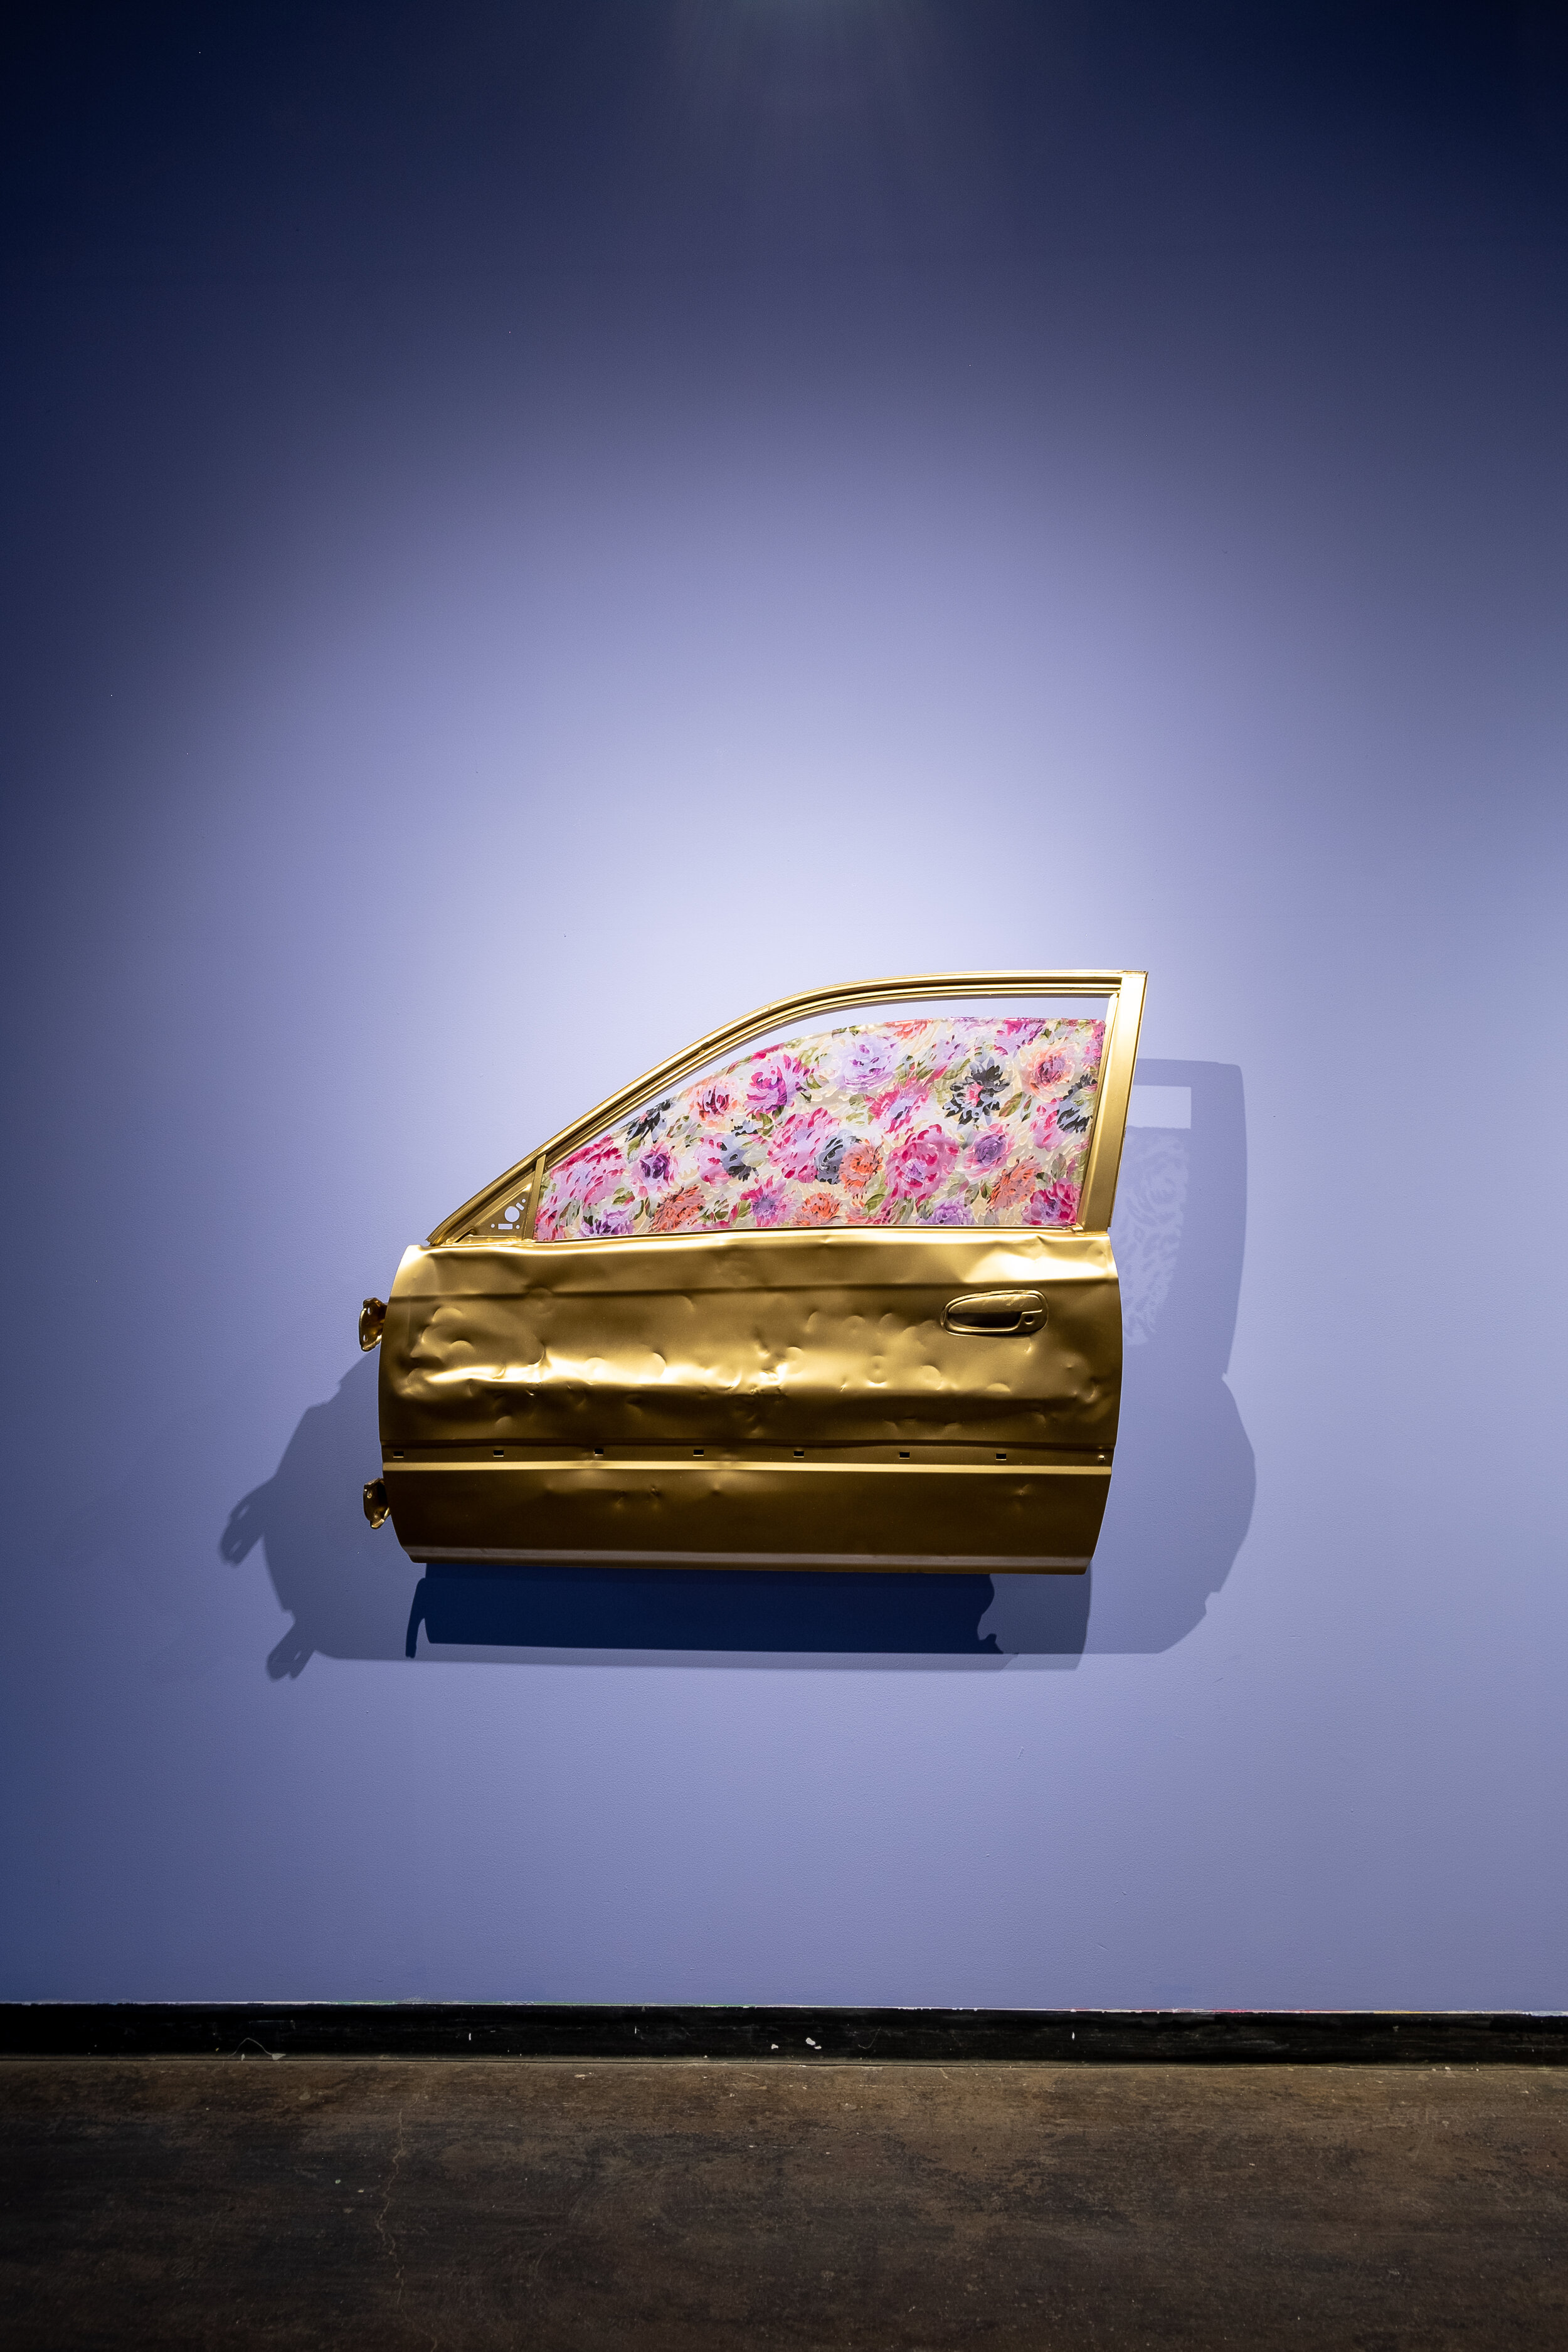  A golden car door is hung on the wall. The door has been completely spray-painted gold, and the door has multiple large dents in it. The window does not have clear glass, but rather a window covering decorated with pink, purple, and orange flowers. 